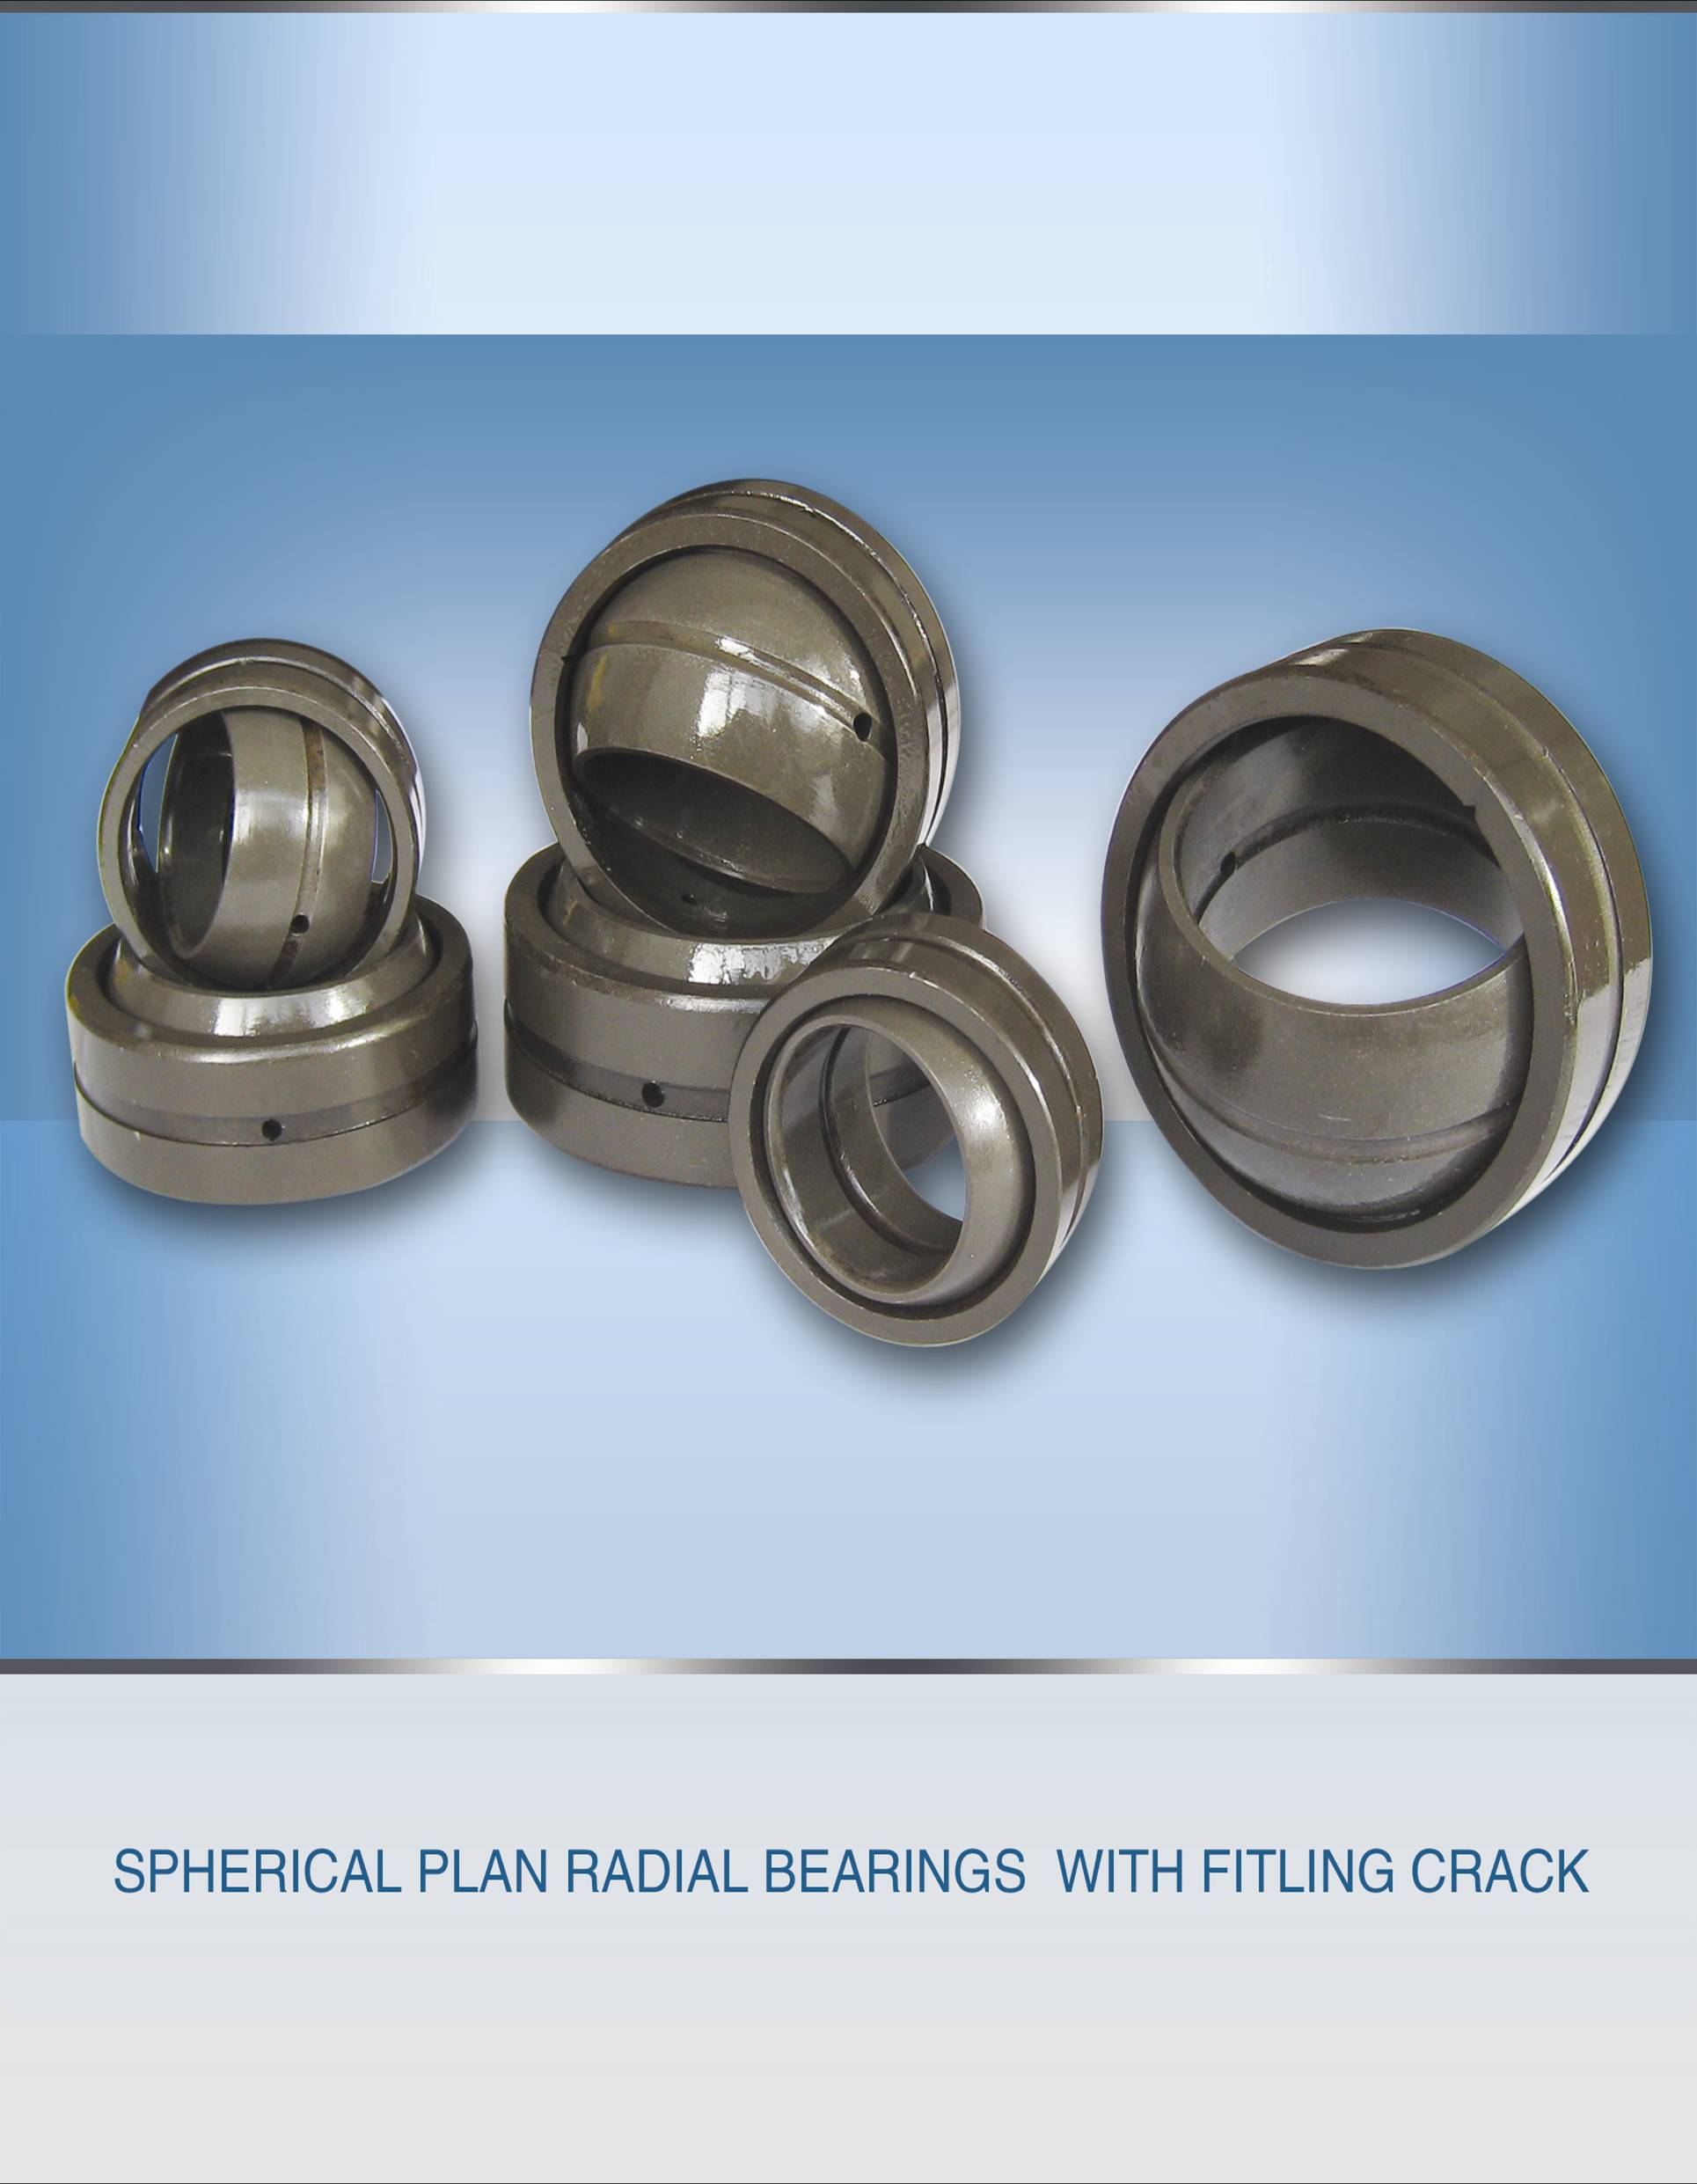 SPHERICAL PLAIN RADIAL BEARINGS WITH FITLING CRACK